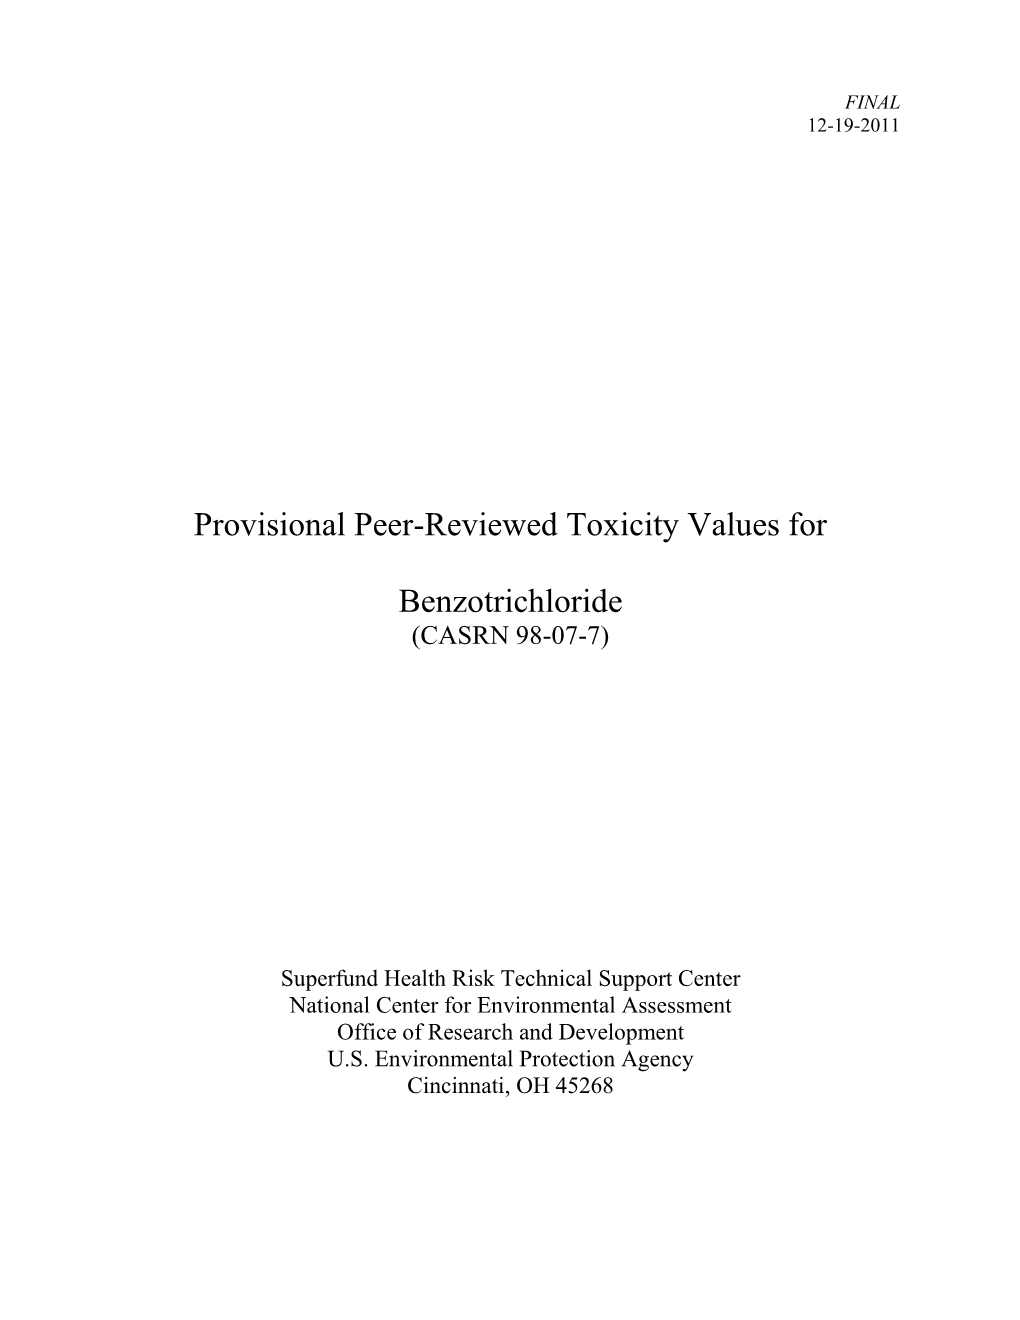 Provisional Peer-Reviewed Toxicity Values for Benzotrichloride (Casrn 98-07-7)